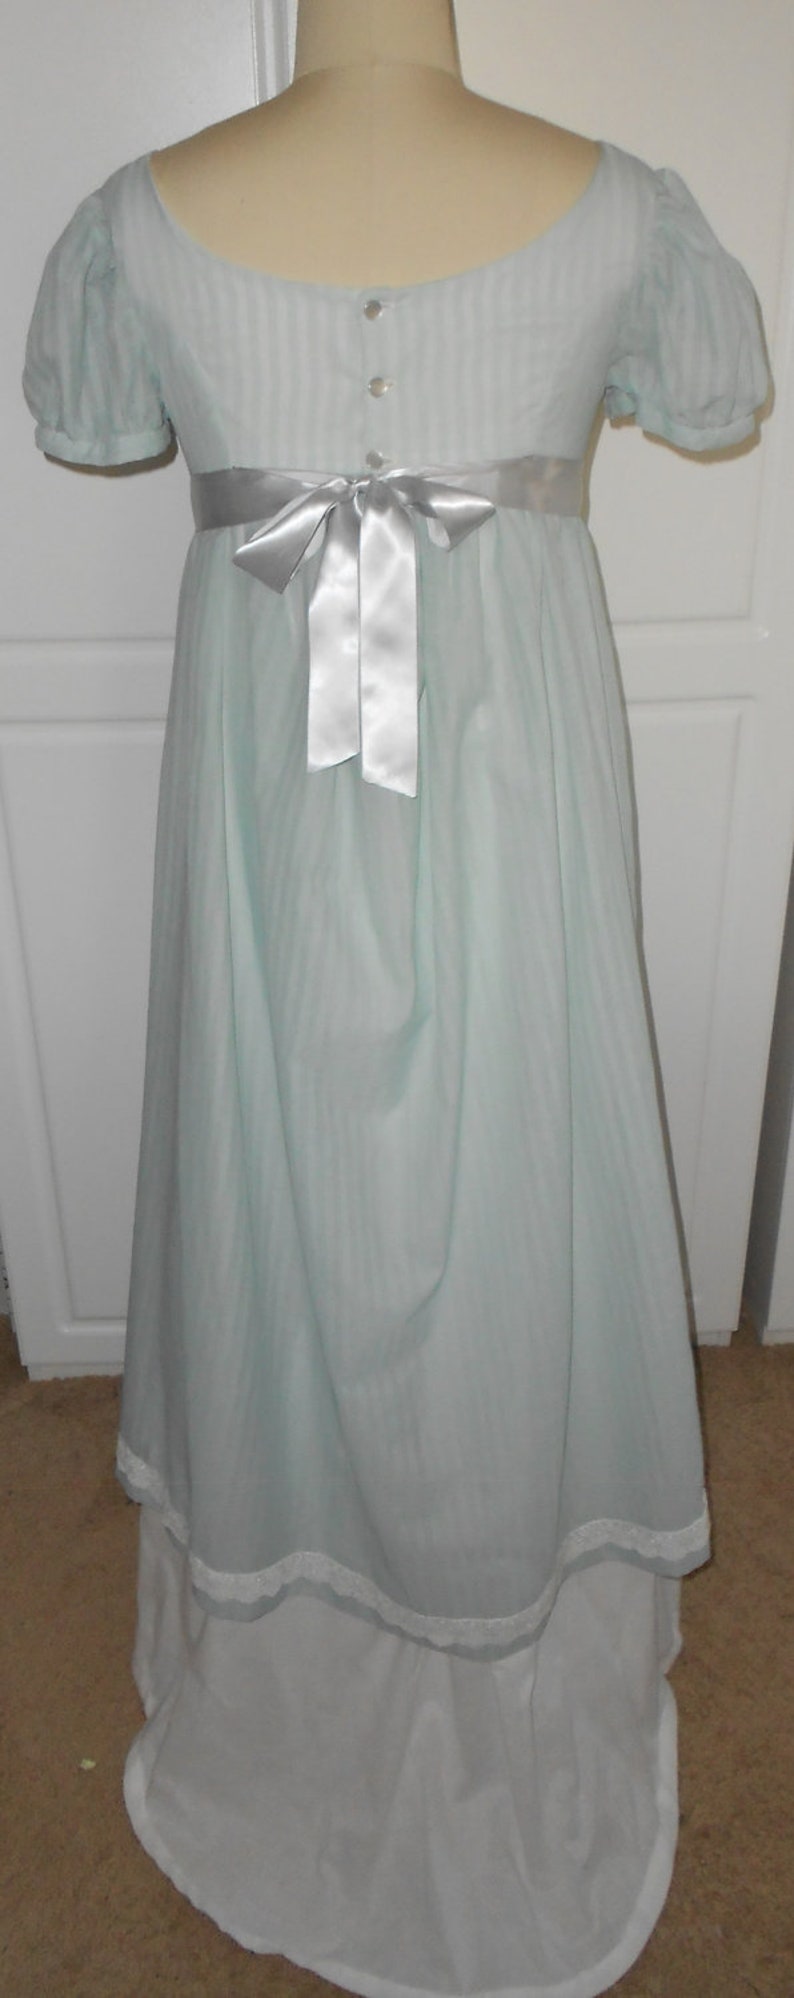 Pride and Prejudice Inspired Tea Gown - Etsy